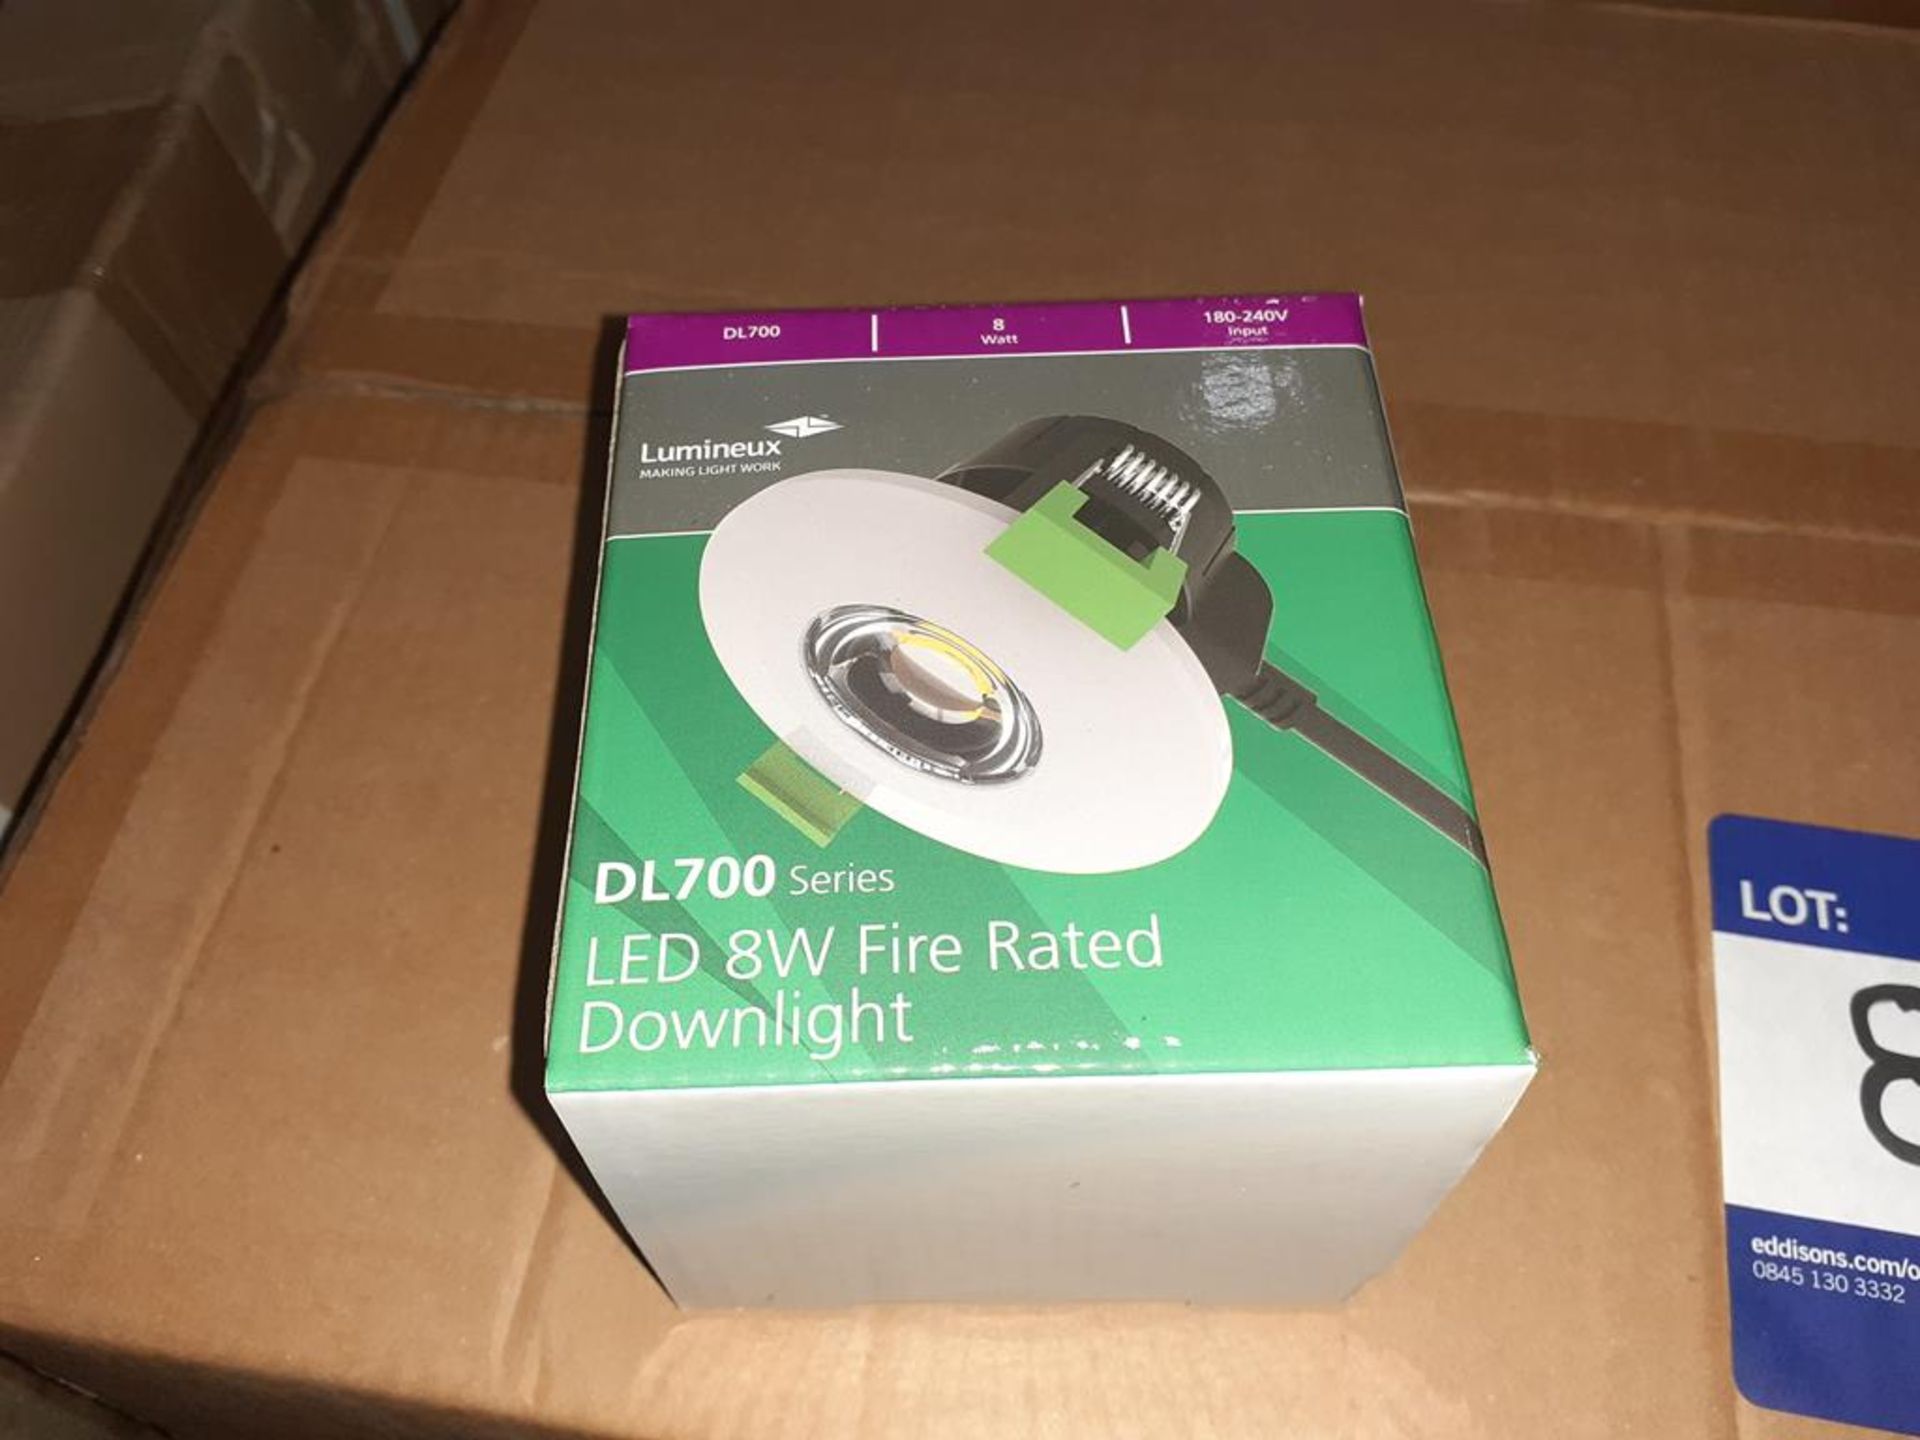 80 x LED 8W Fire Rated Downlight 4000K 180-240V Input OEM Trade Price £ 985 - Image 3 of 3